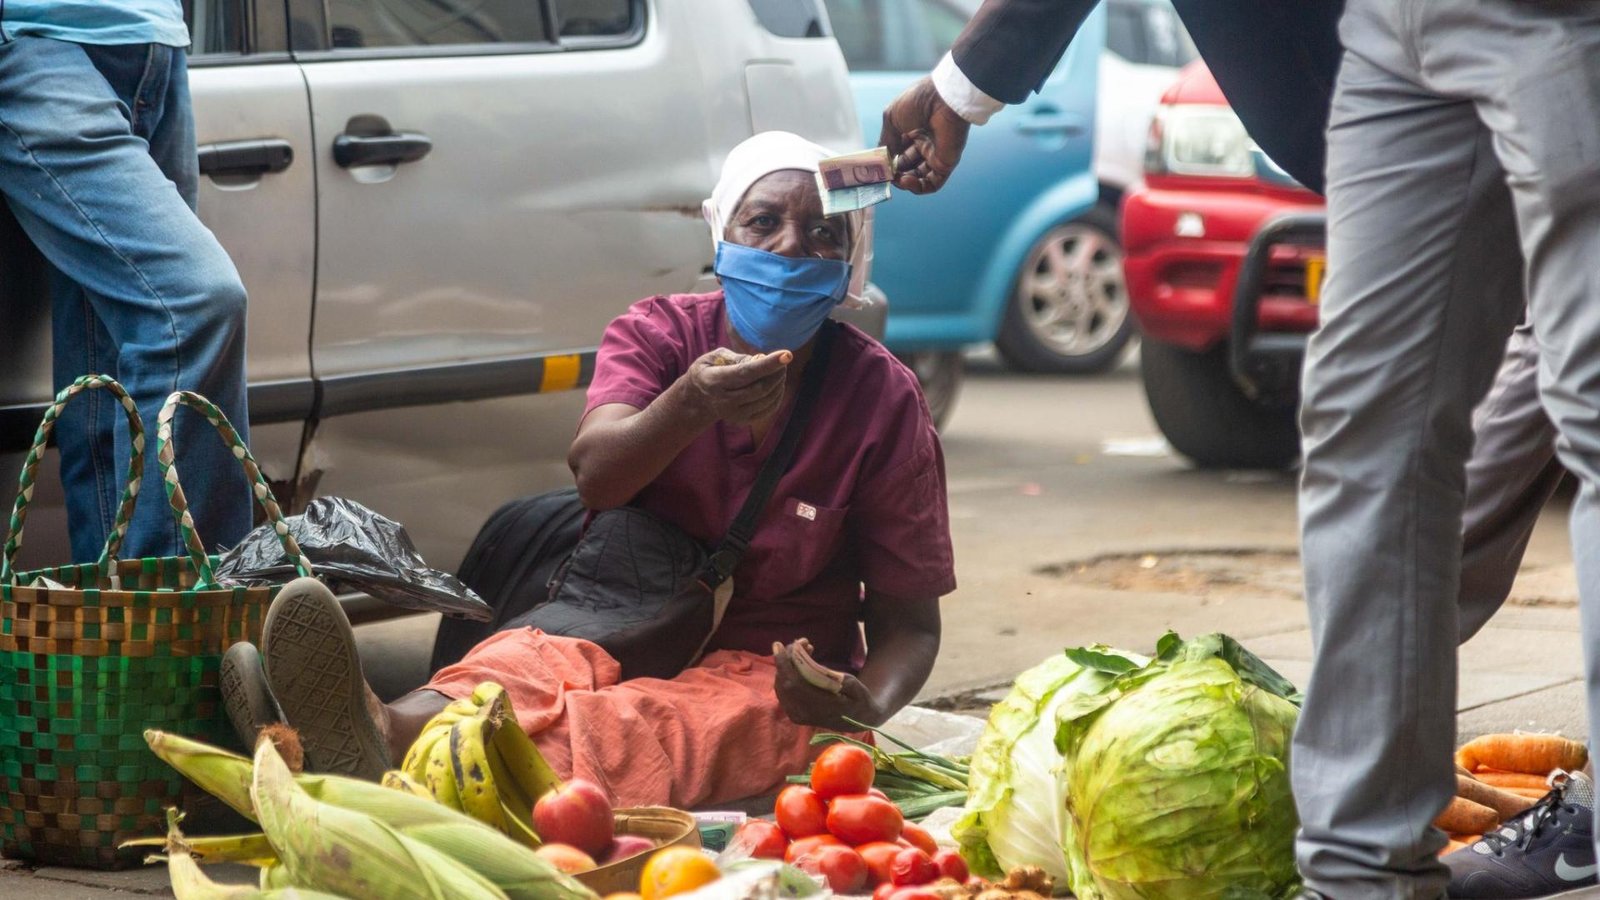 Tekeshe: Why is vending being criminalised when there are no jobs?